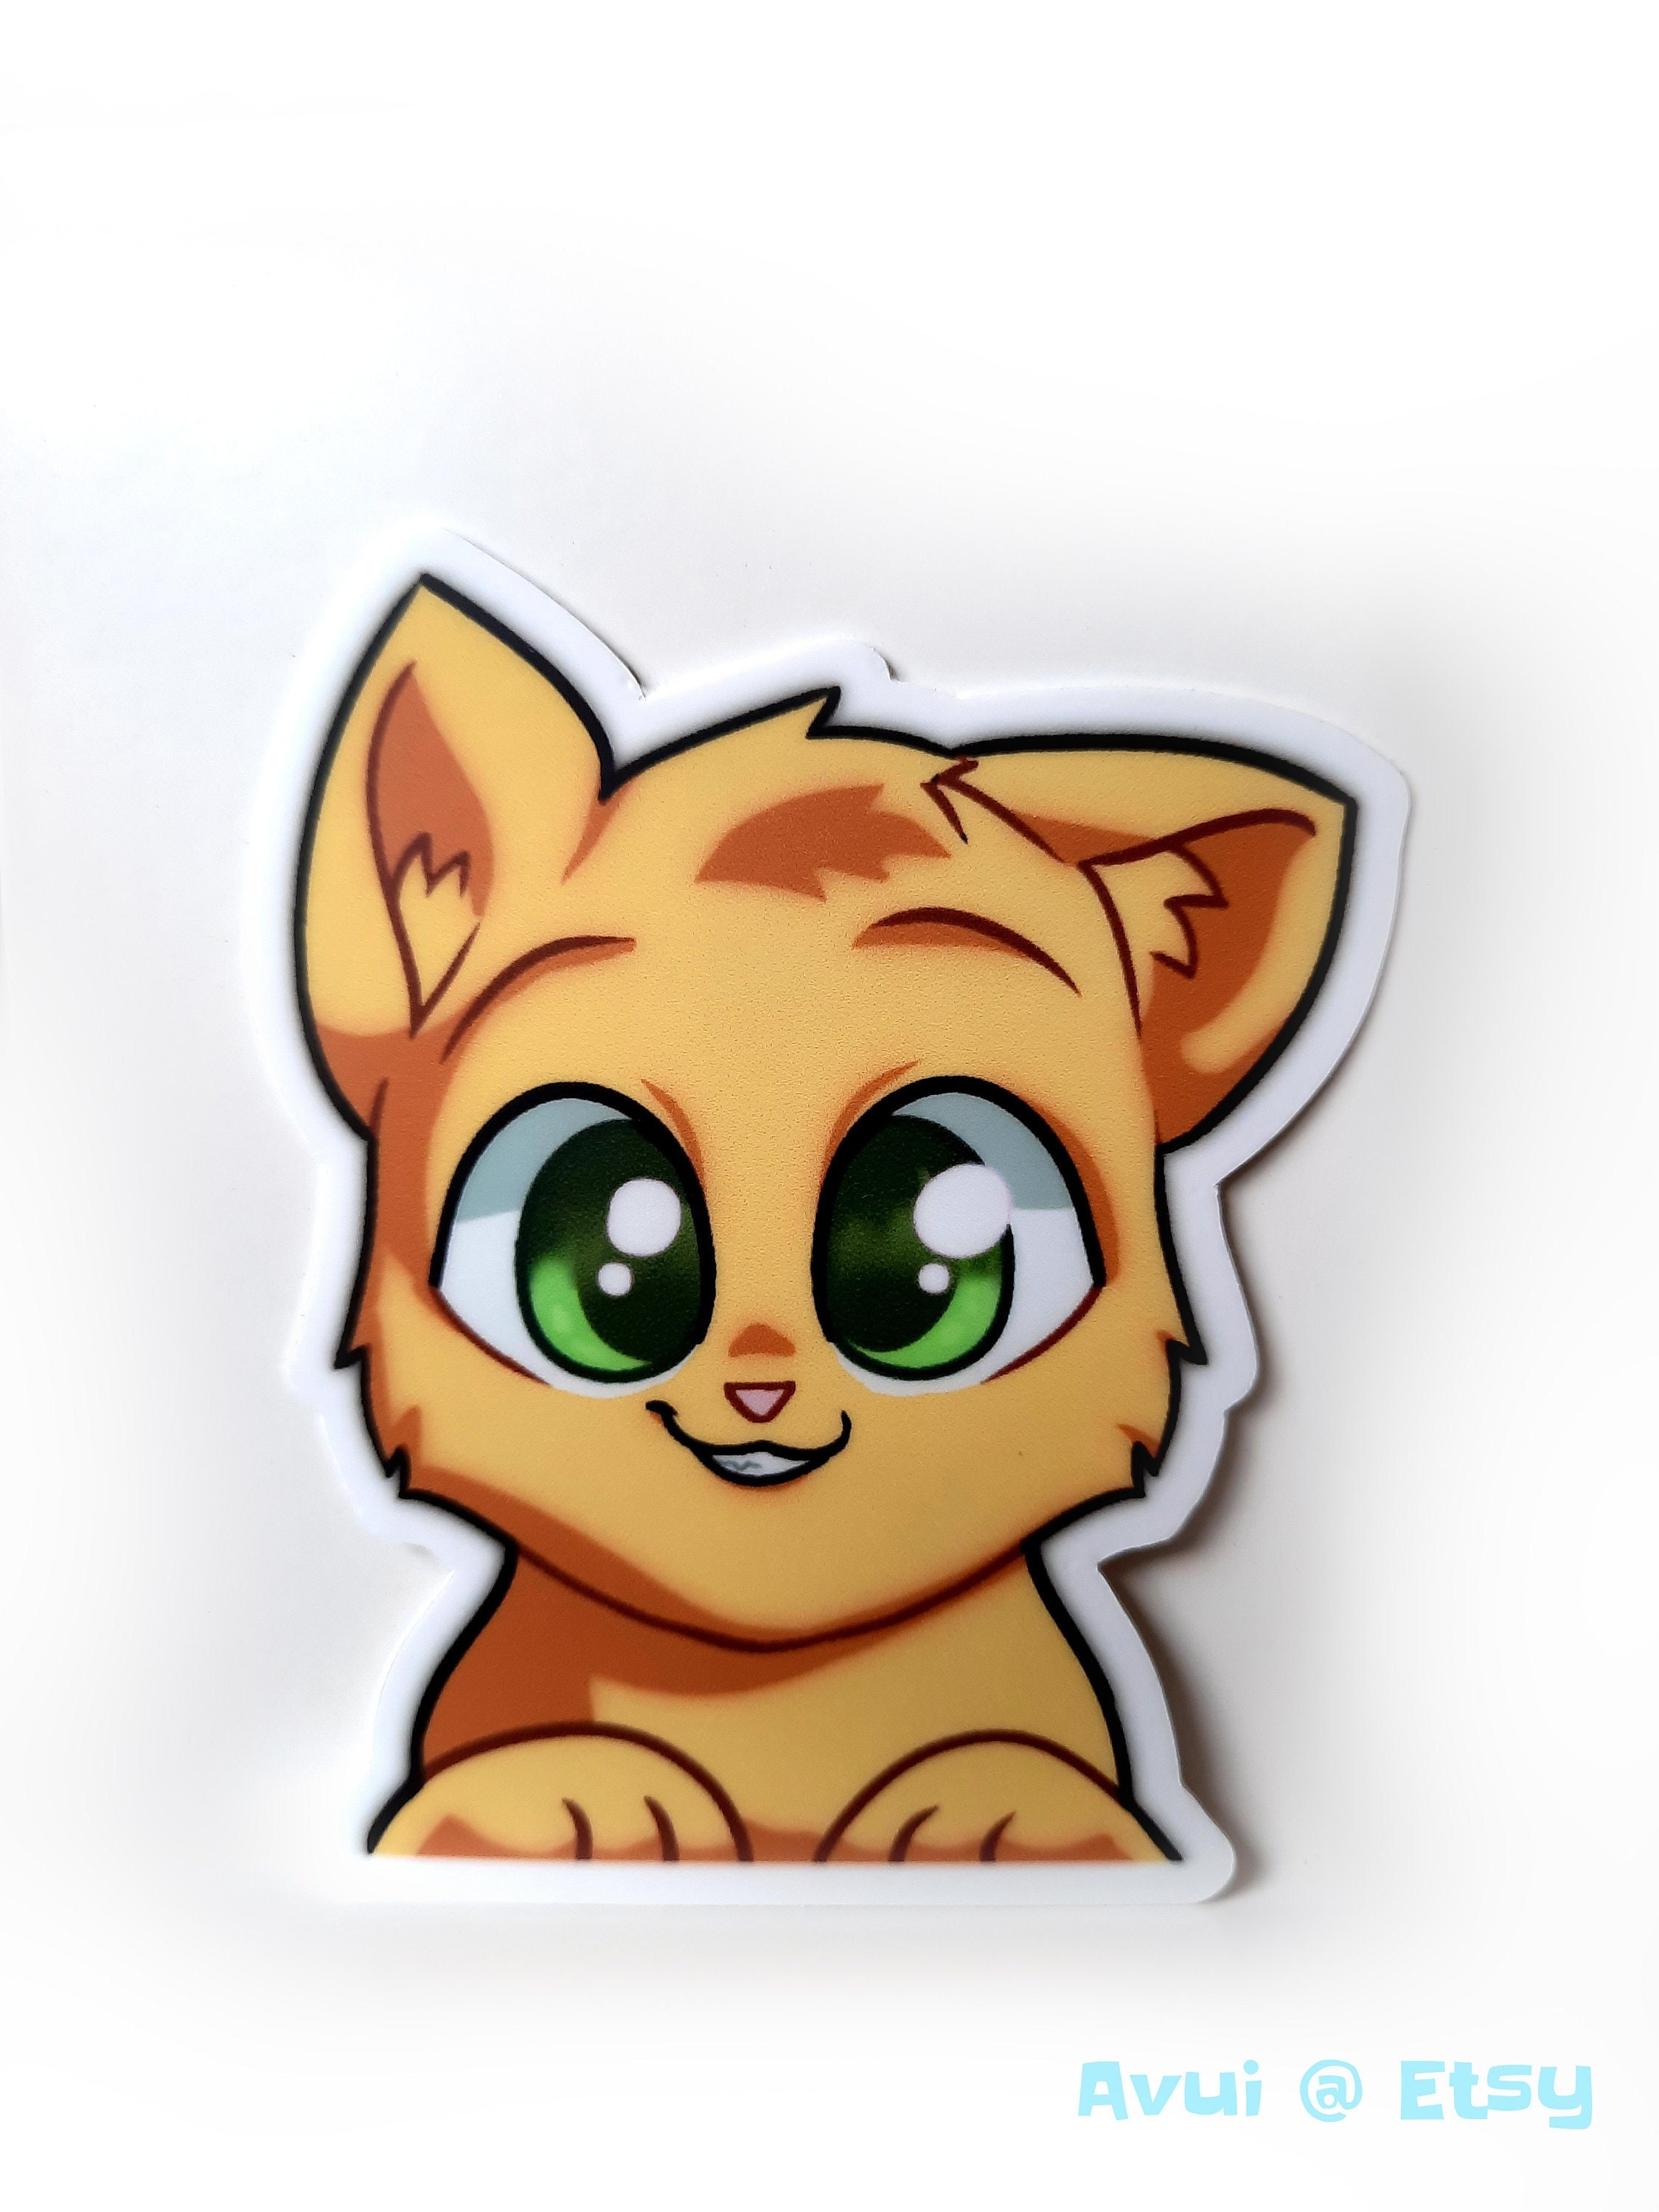 warriors inspired ashfur Sticker for Sale by MagicPistachio